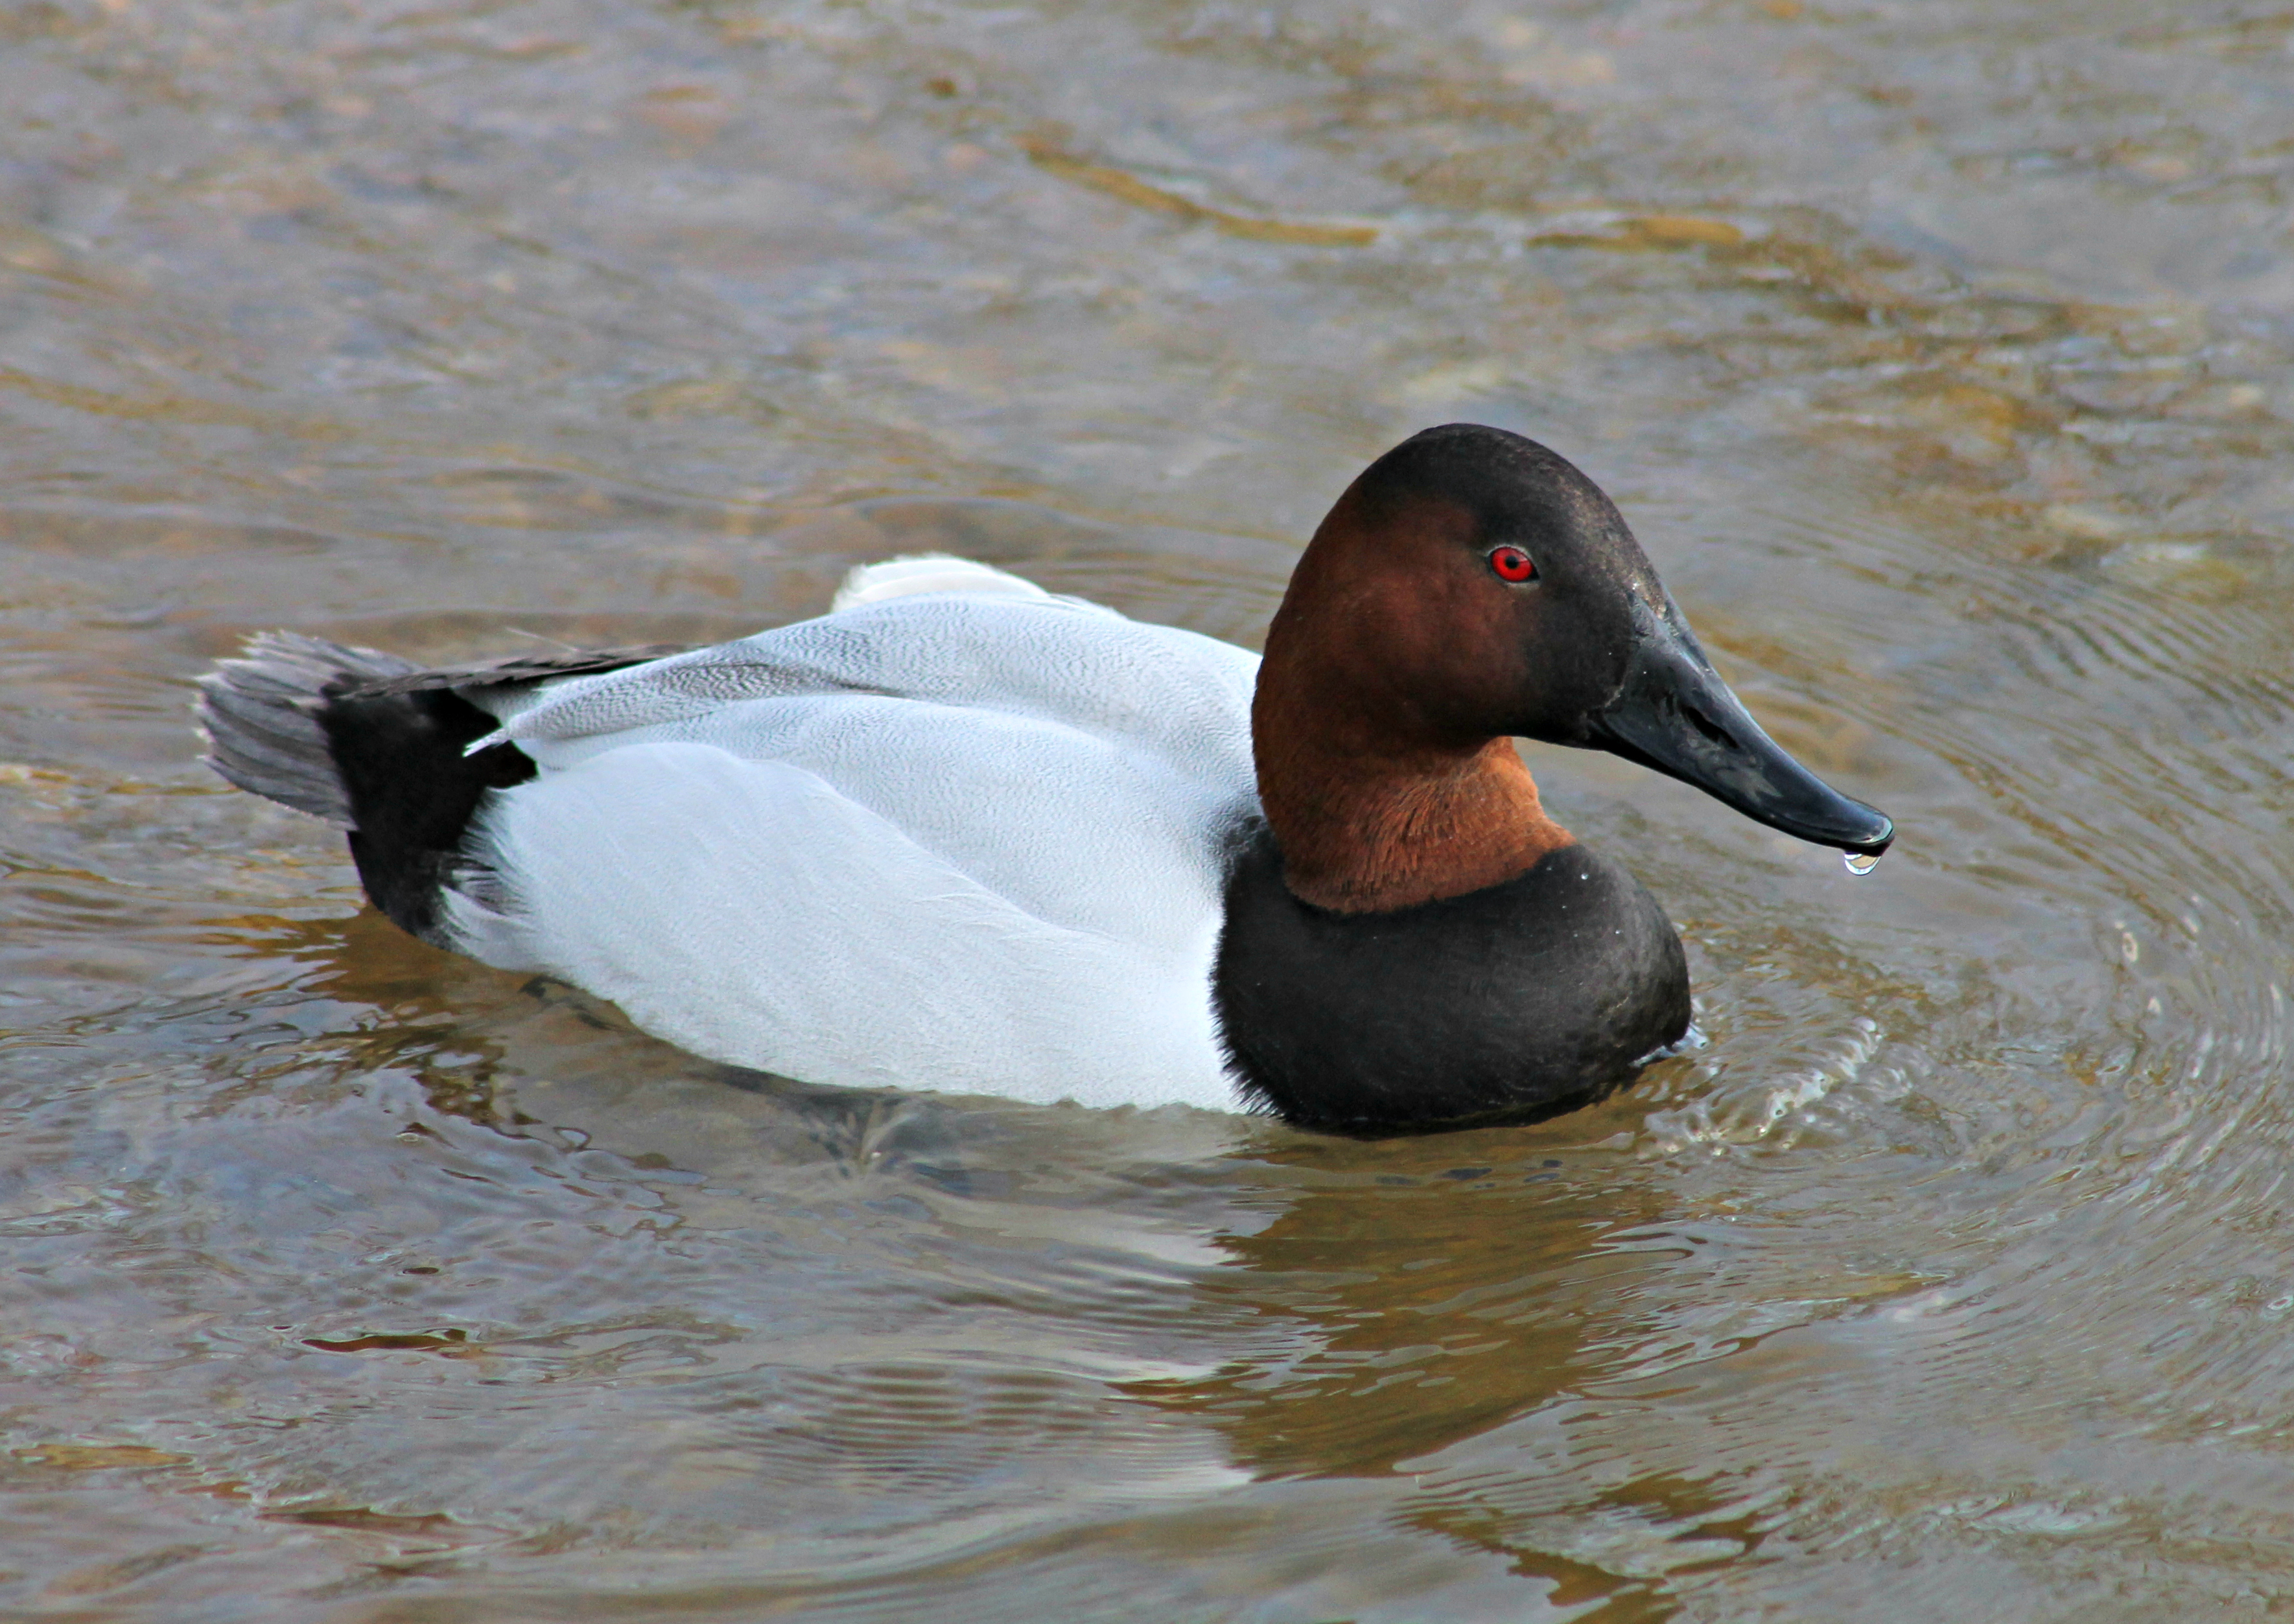 An image of a male canvasback duck swimming.